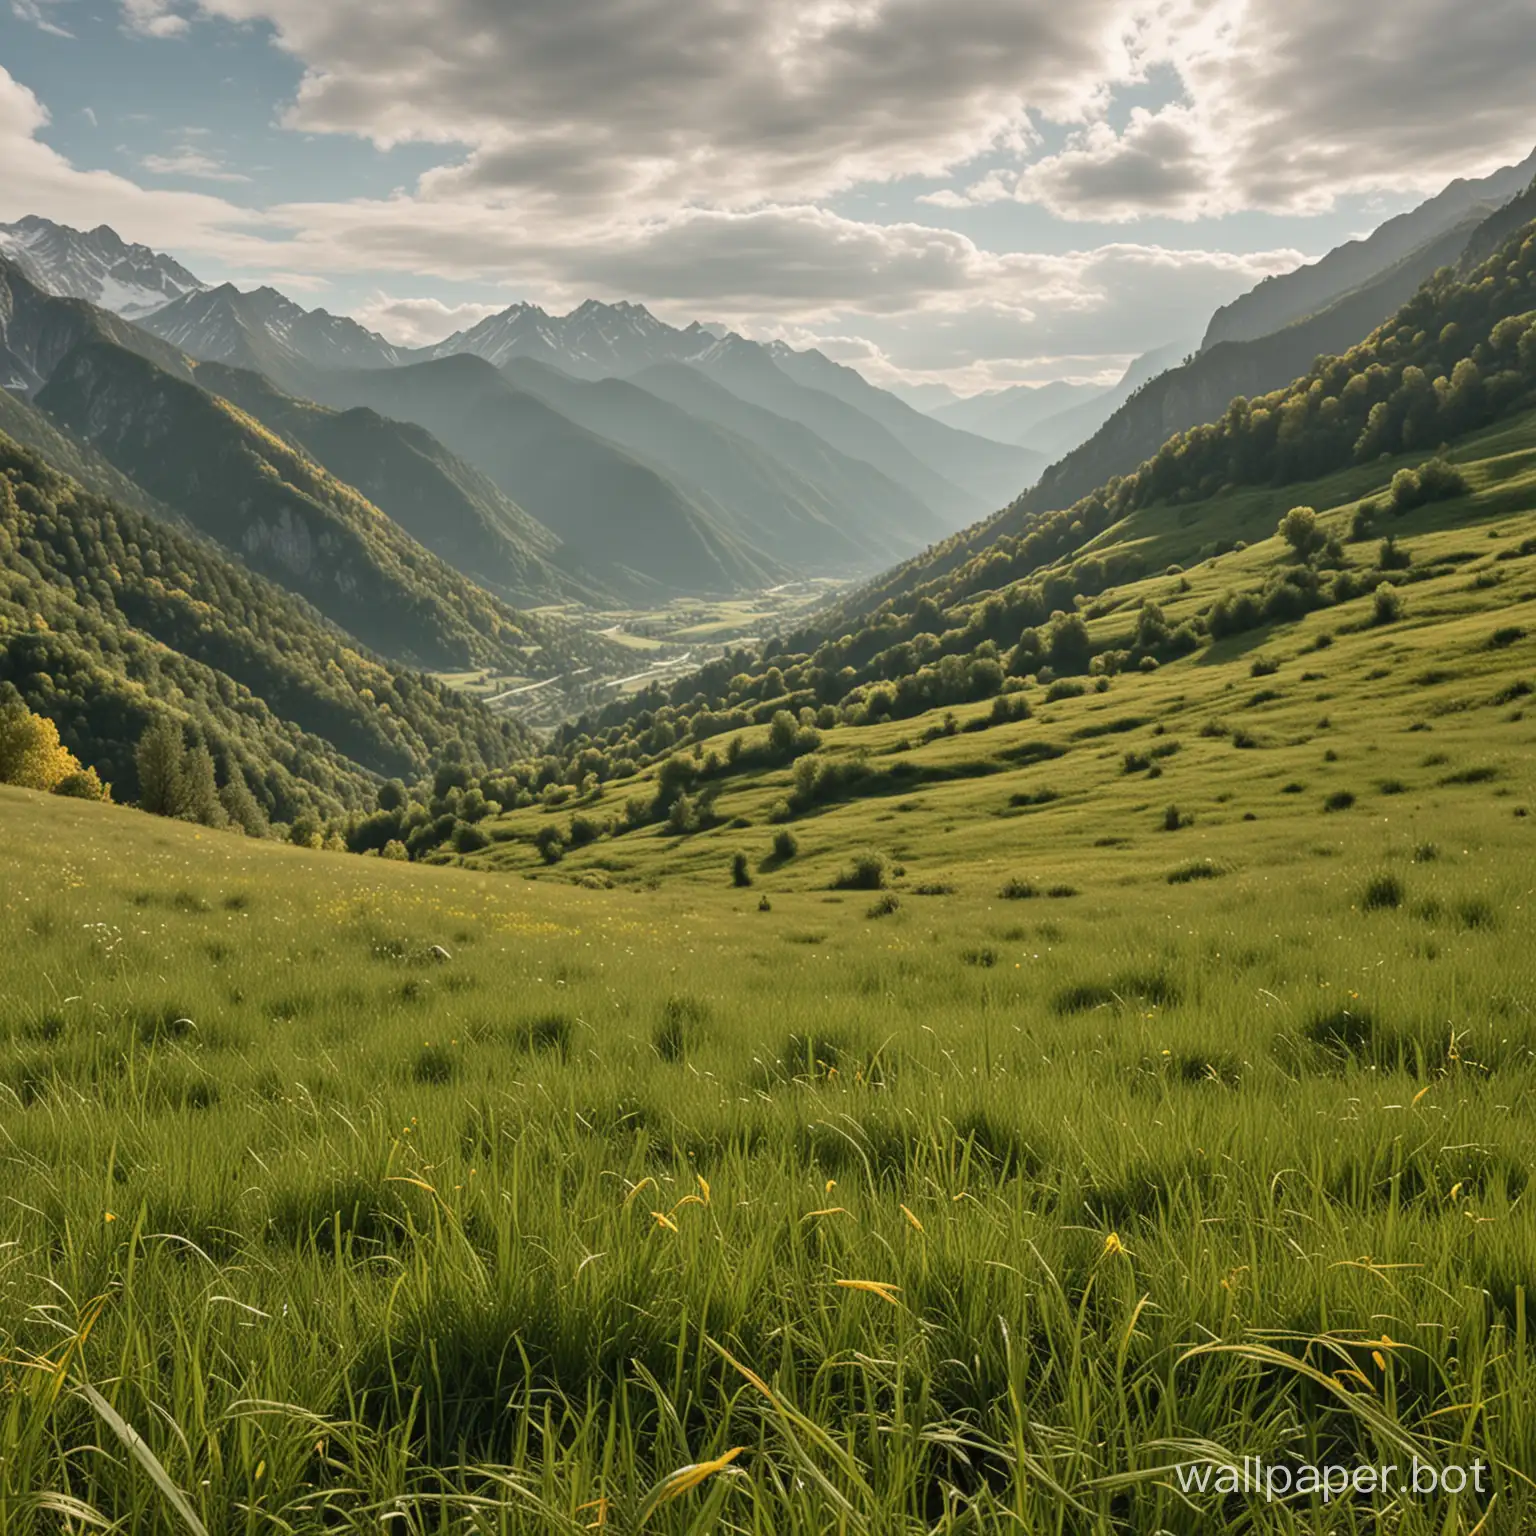 a nature image with small grass all over and green mountains with green mountains and some yellow trees.

camera angle is from ground. 